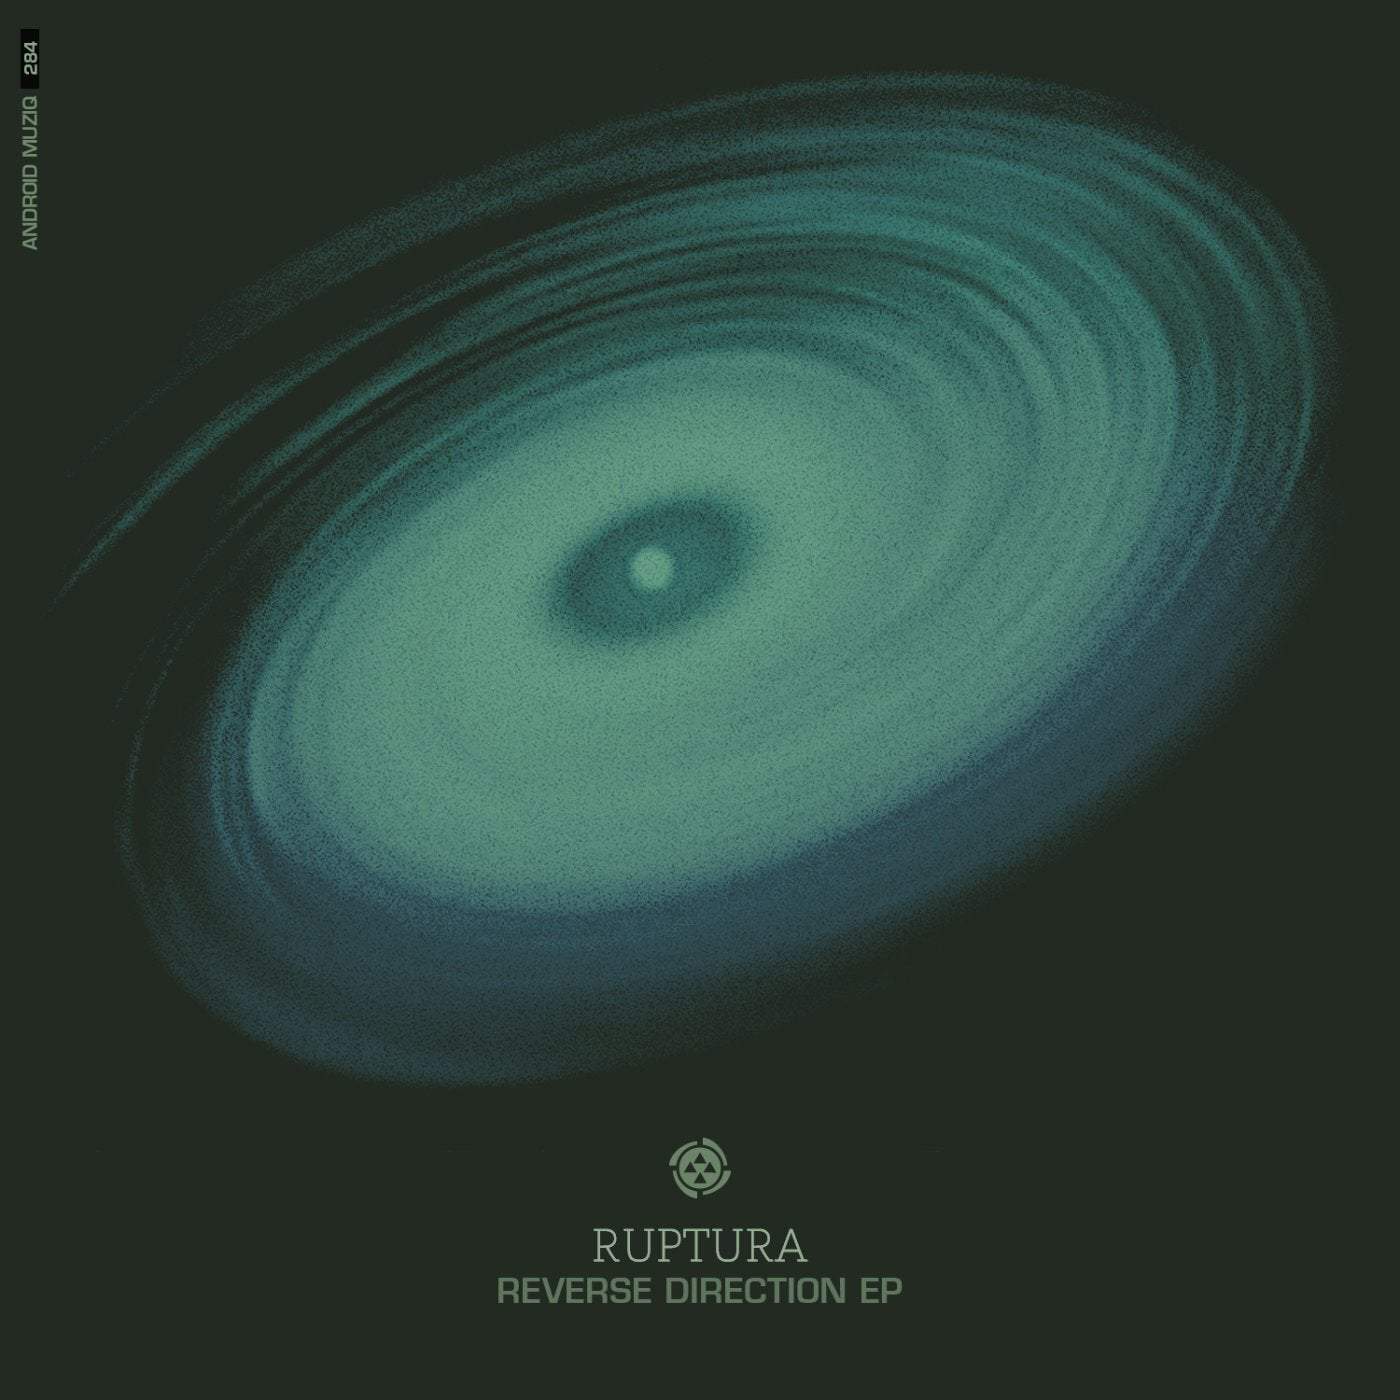 image cover: RUPTURA - Reverse Direction EP / ANDROID284